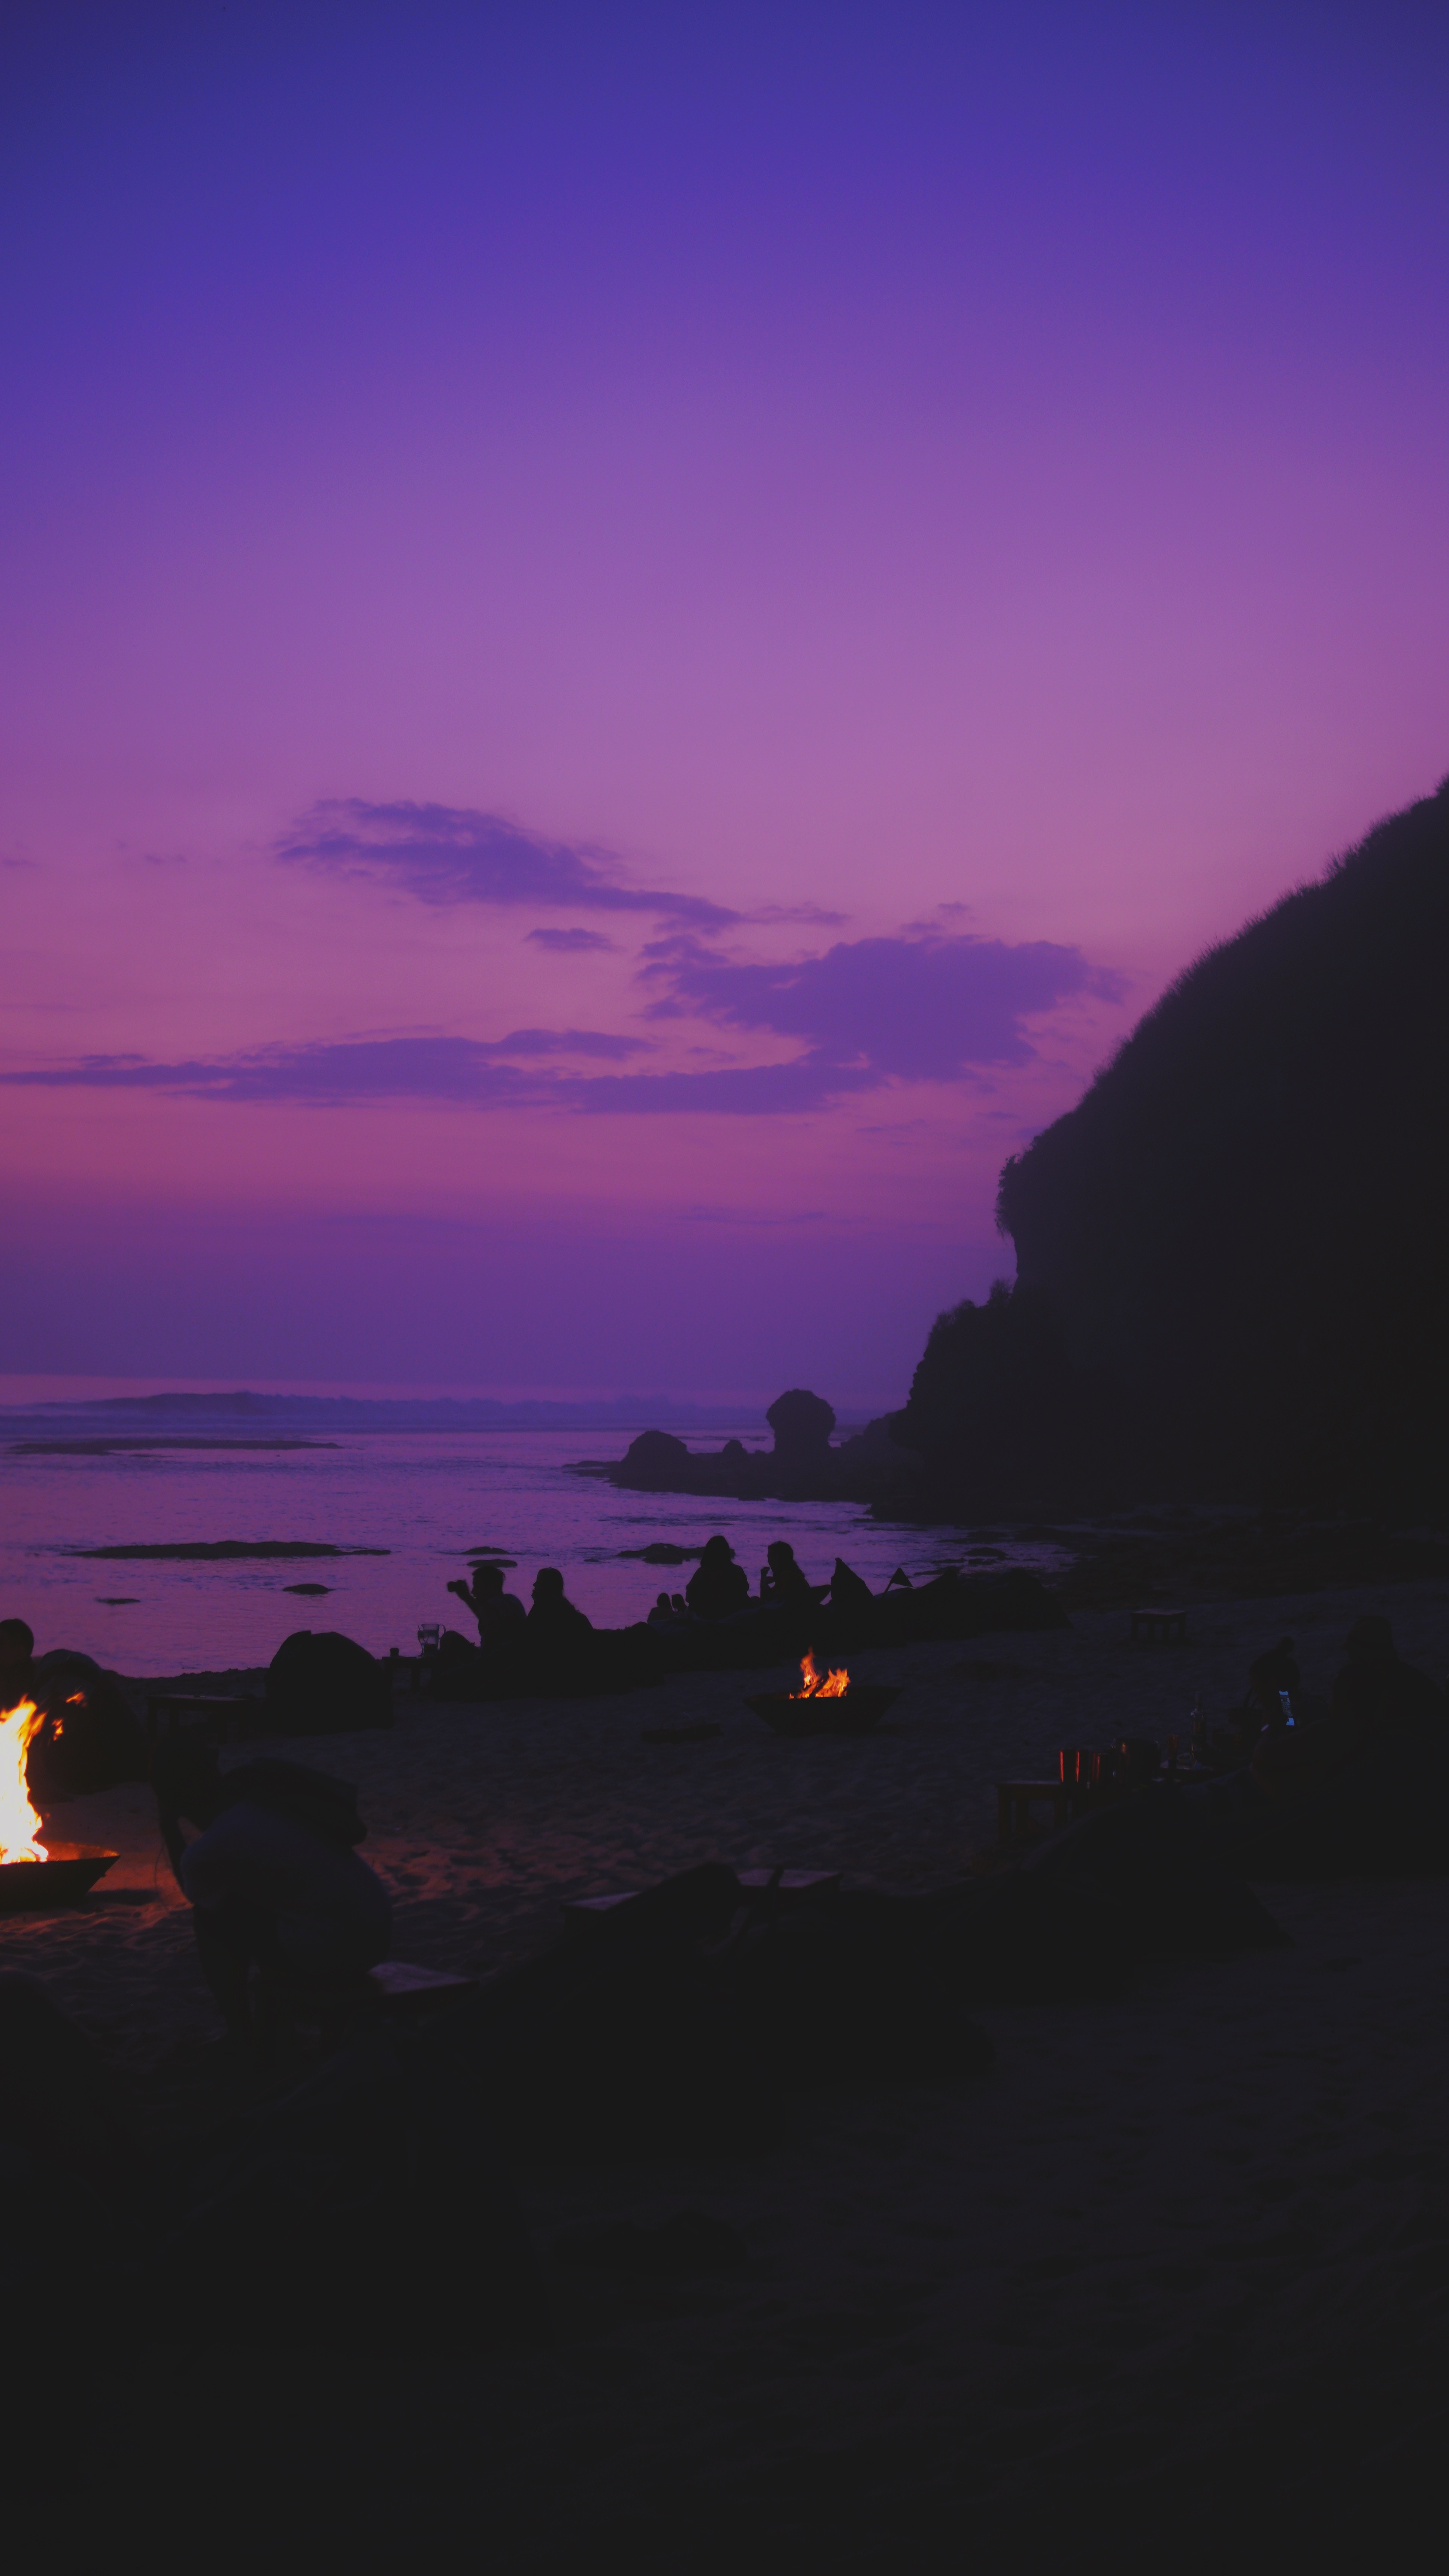 indonesia, dark, silhouettes, sunset, beach, shore, bank, relaxation, rest Full HD